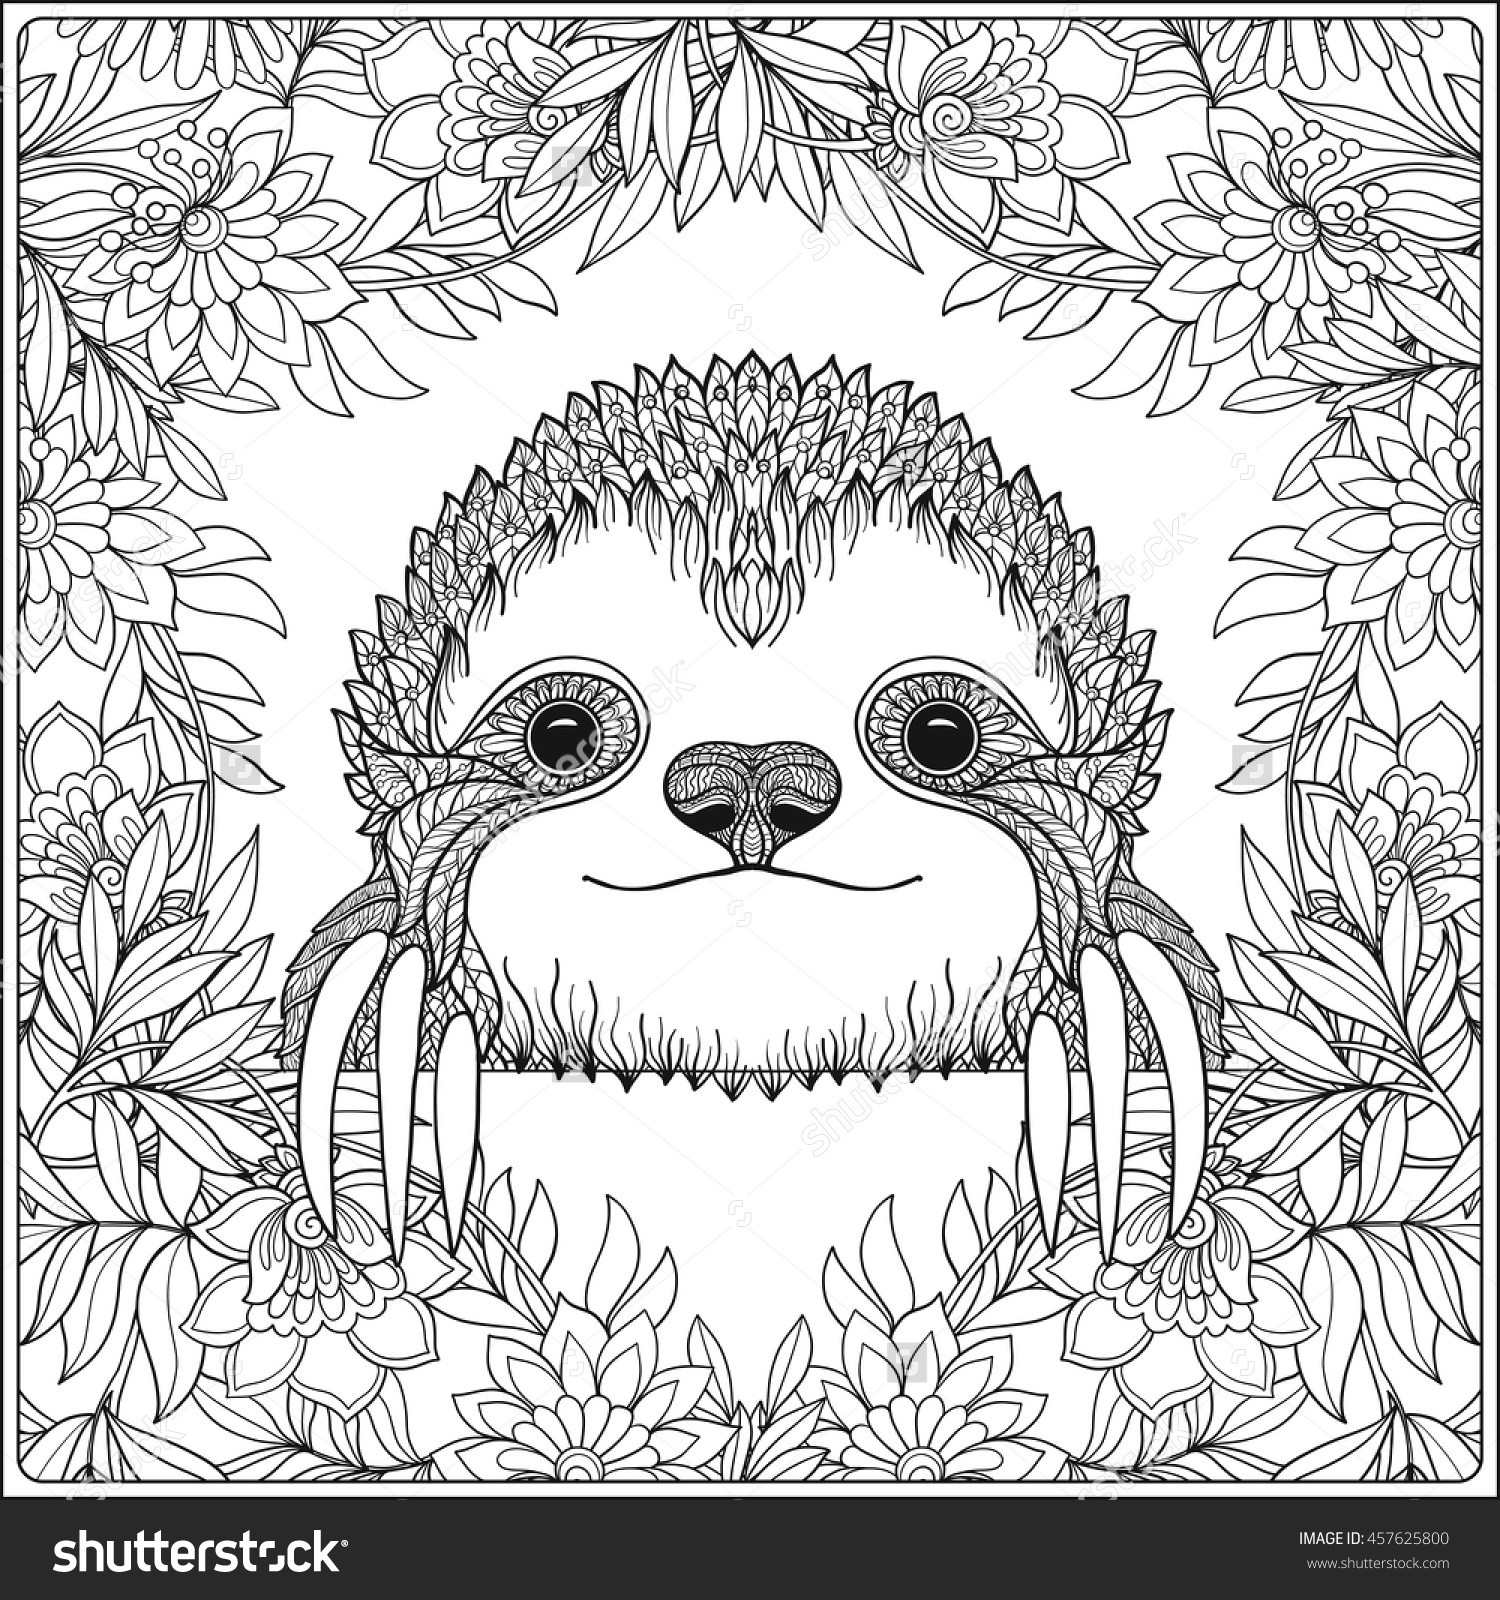 Free Coloring Pages Of Three Toed Sloth | Dog Breeds Picture